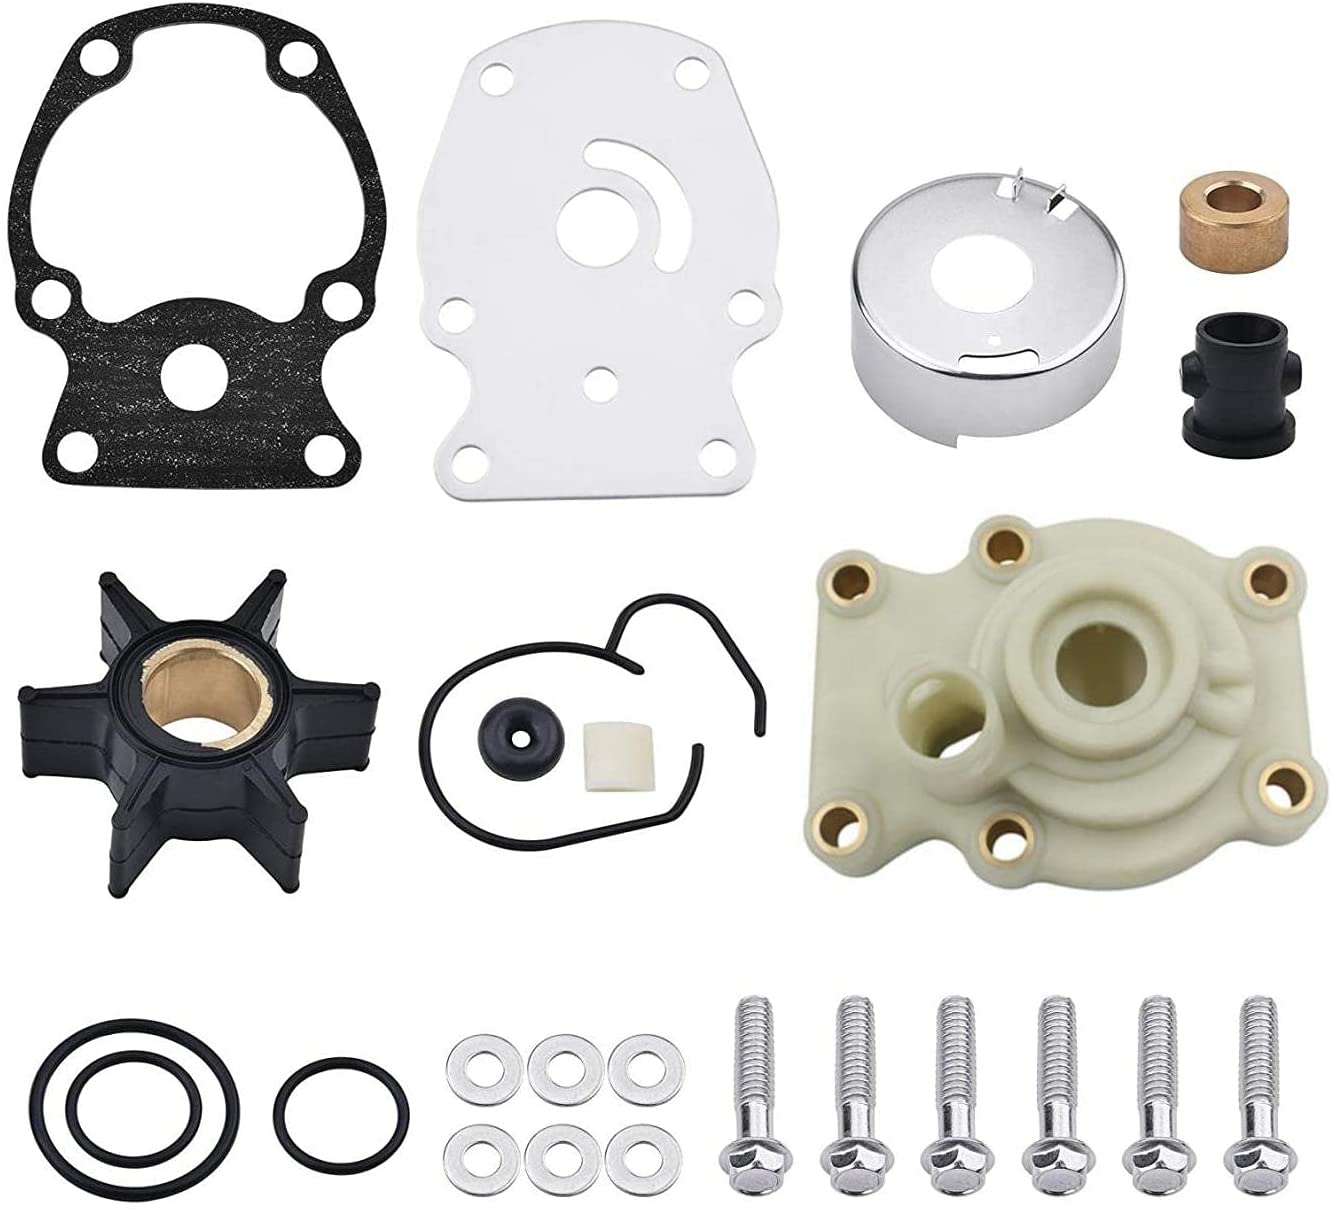 Water Pump Repair Kit for Johnson Evinrude 20/25/30/35 HP Outboard Replaces 393630